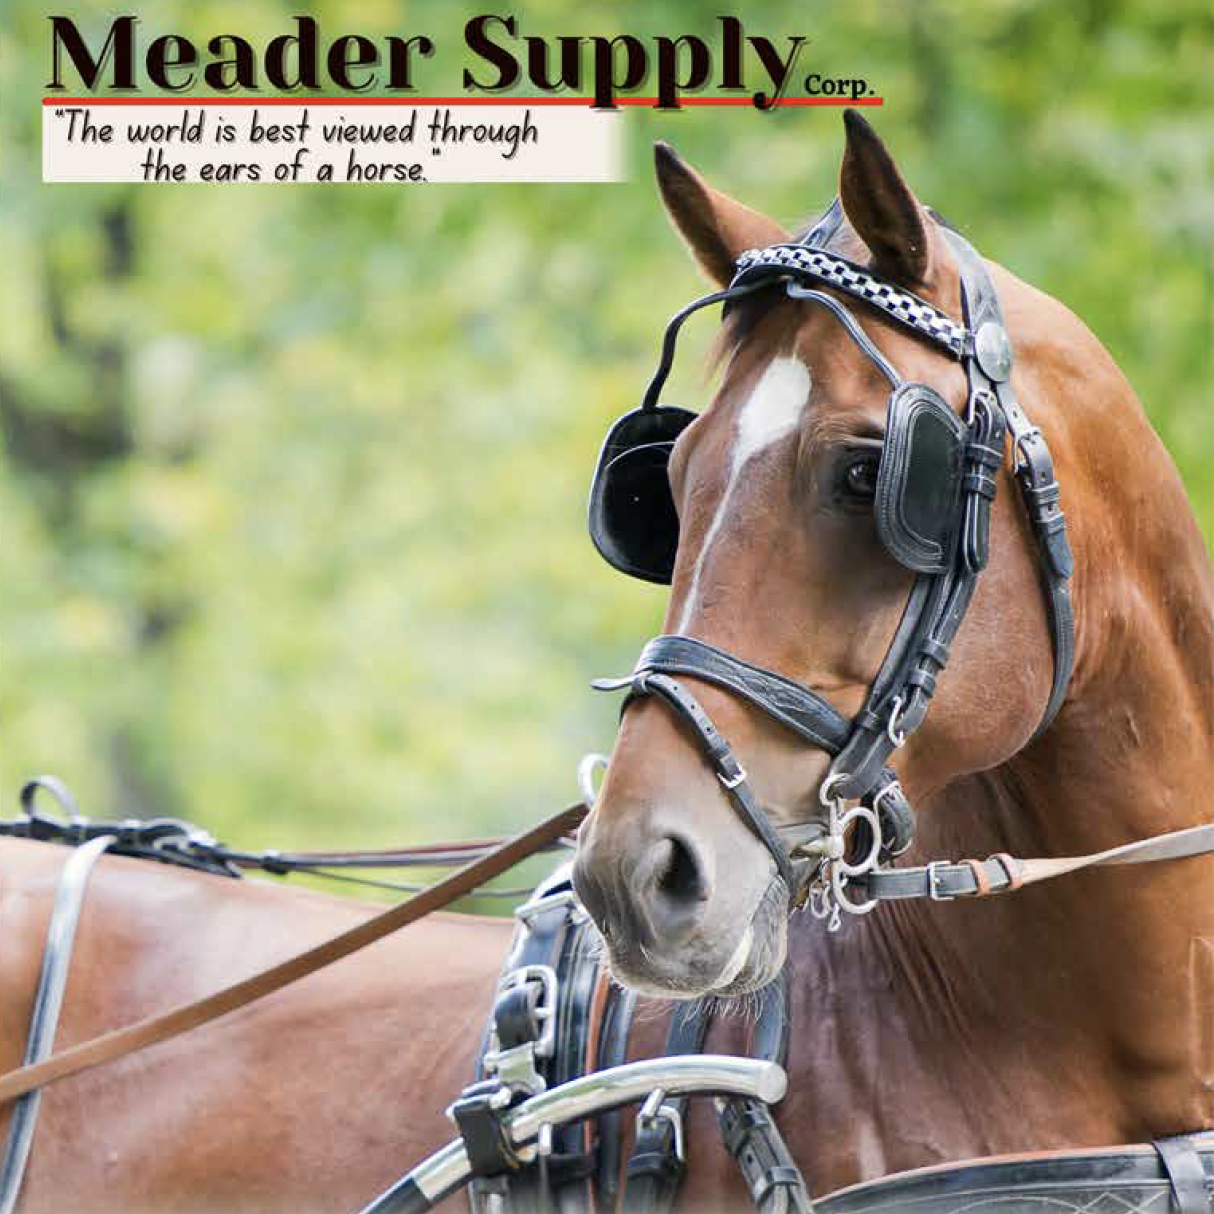 Meaders Supply